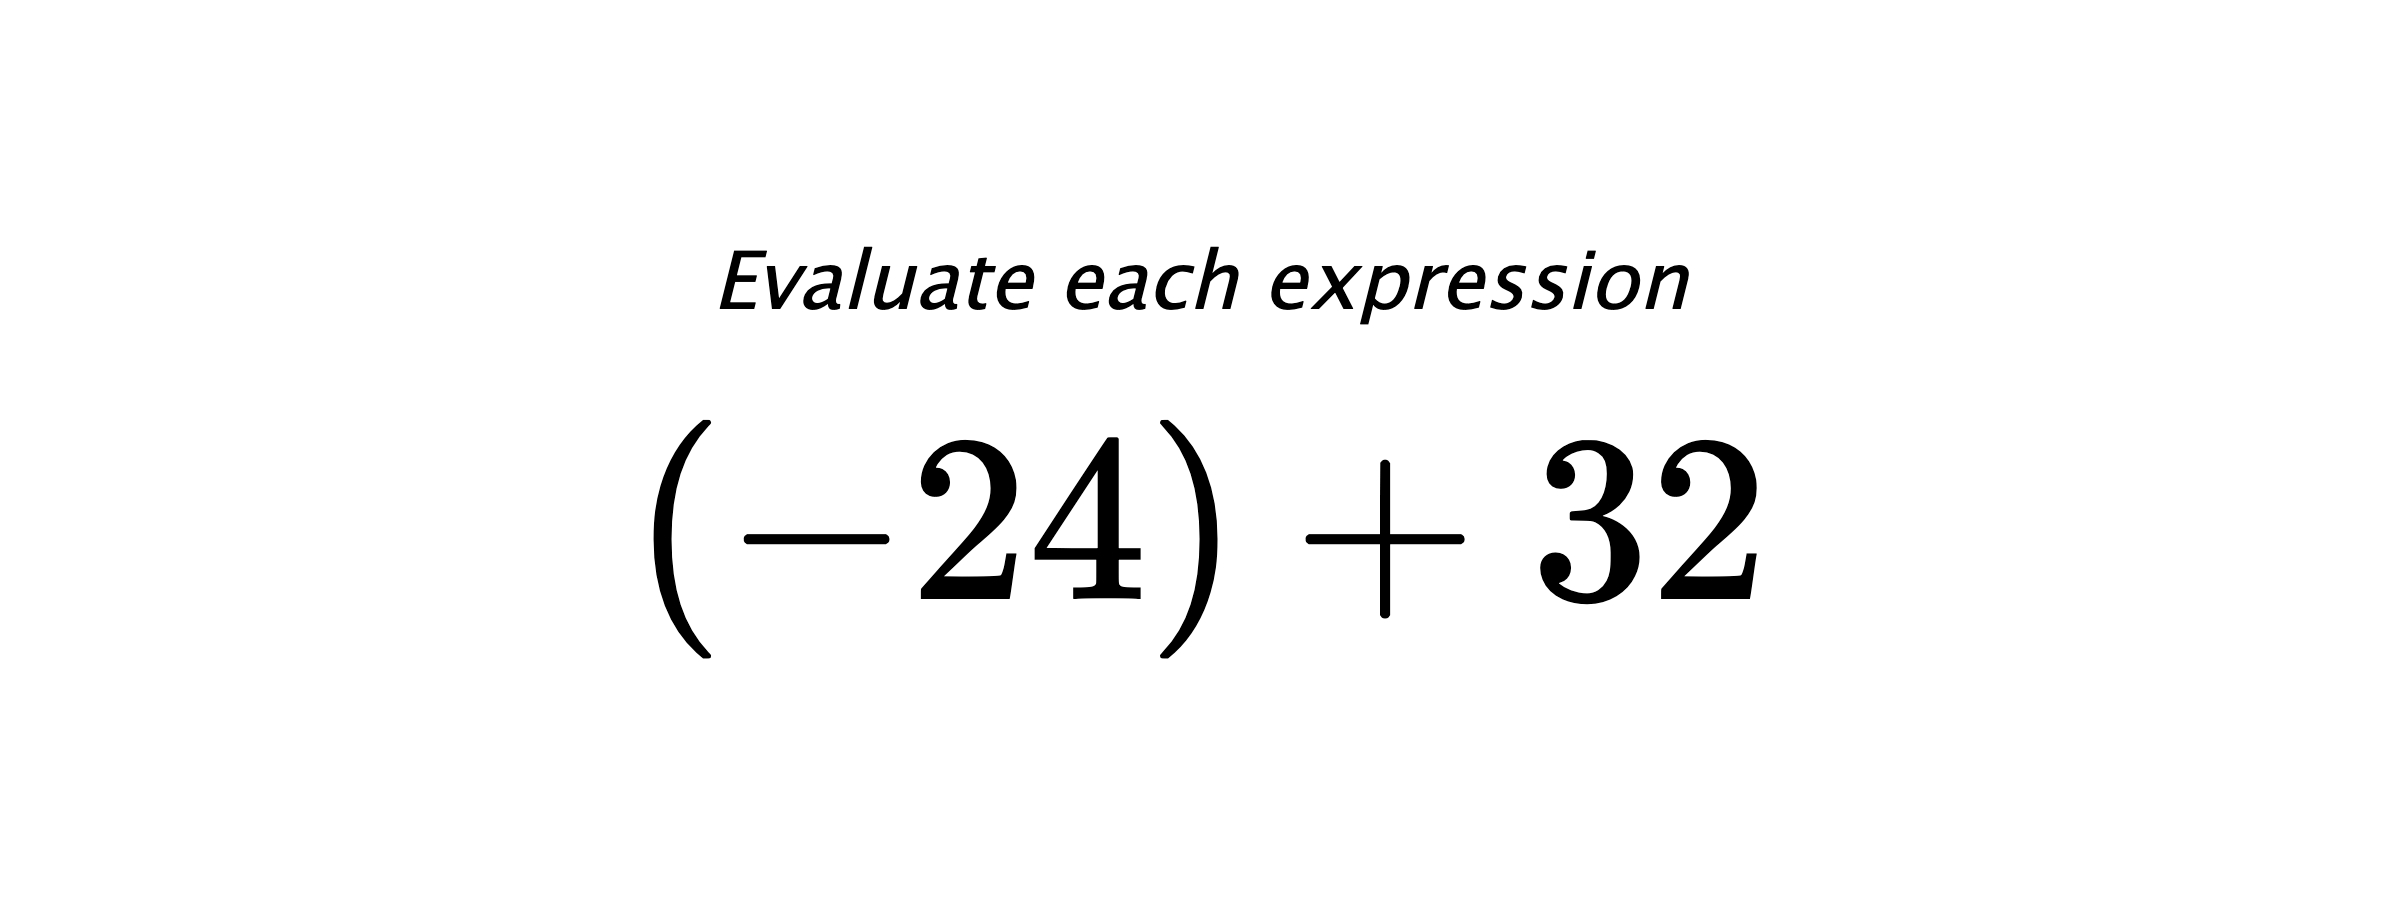 Evaluate each expression $ (-24)+32 $